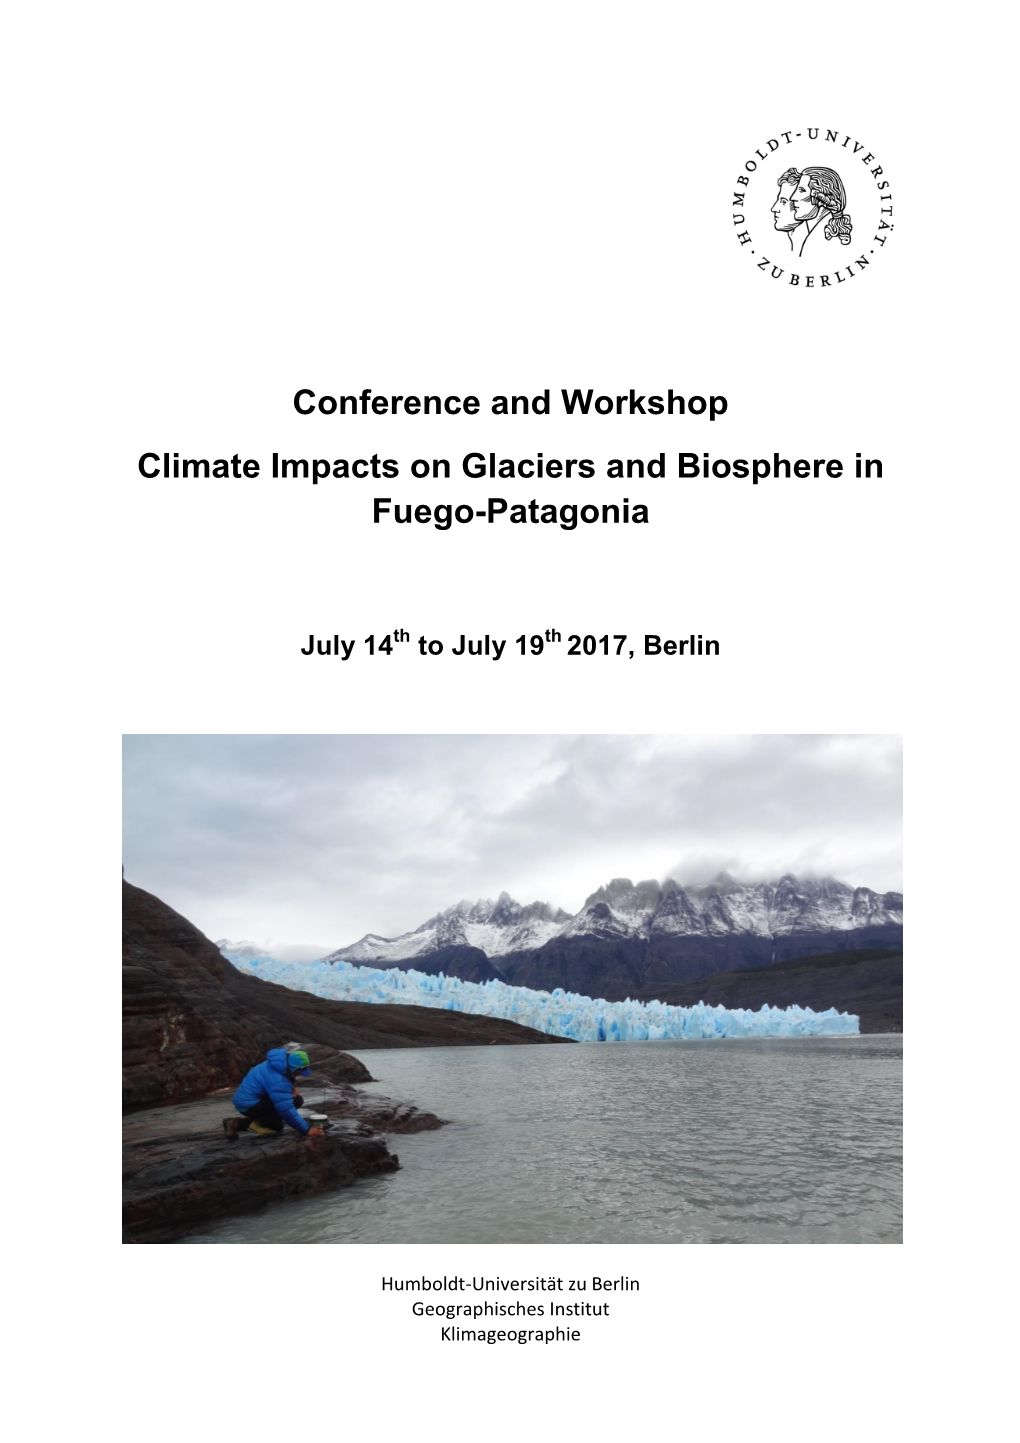 Conference and Workshop Climate Impacts on Glaciers and Biosphere in Fuego-Patagonia